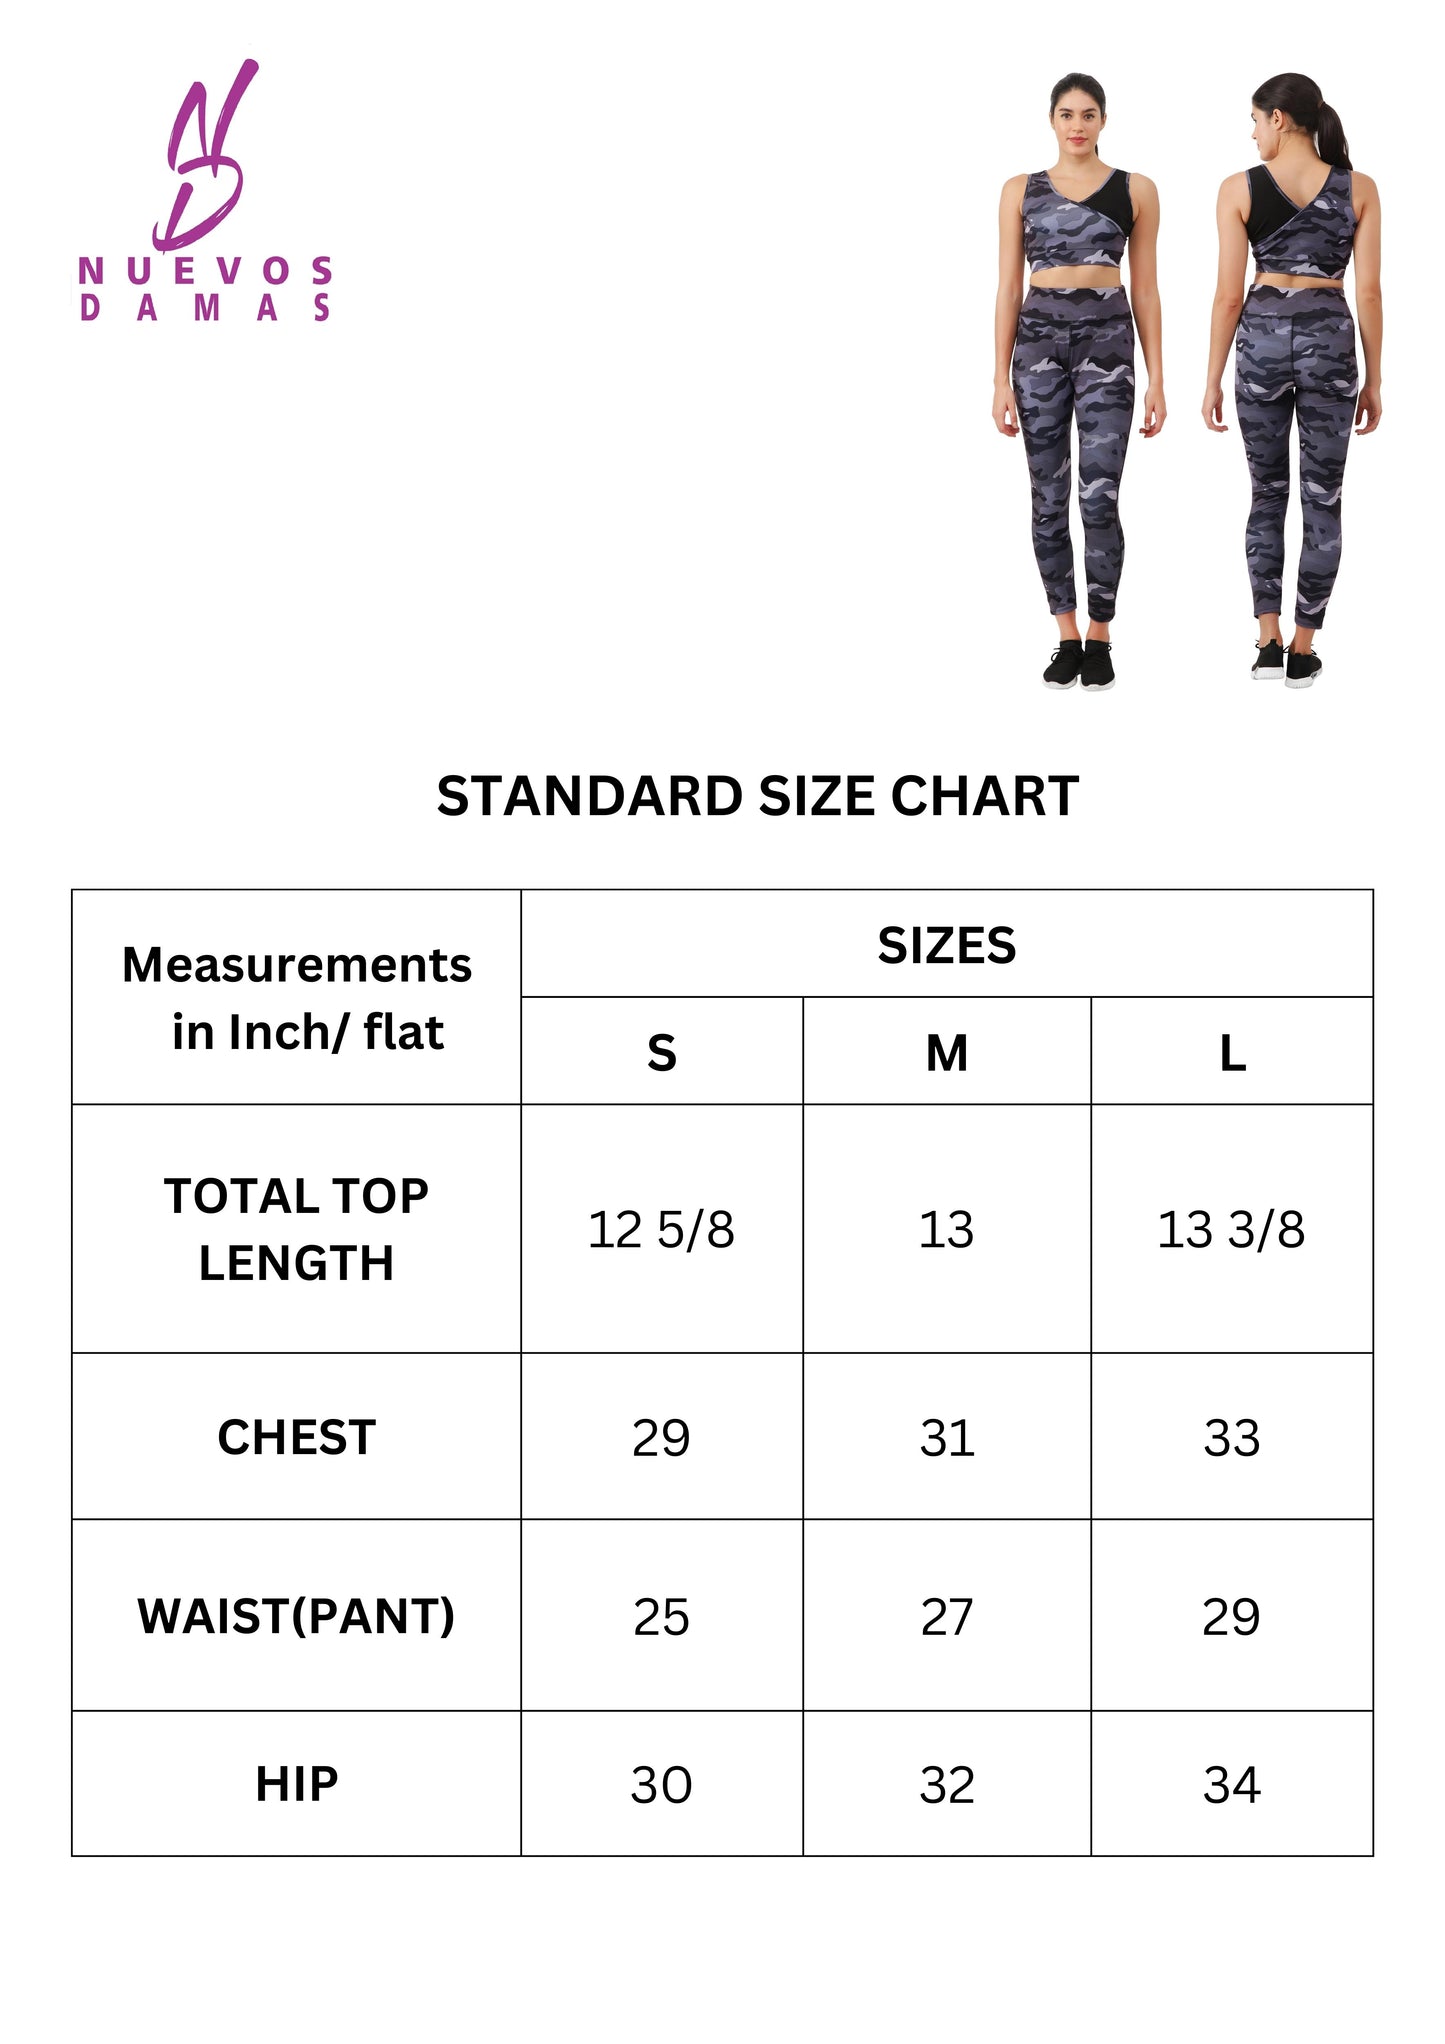 NUEVOSDAMAS Camaouflage Printed Women Active WearTracksuit | Gym Wear Padded Top And Bottom Set | Dry Fit Women Active Wear Combo Set_purple